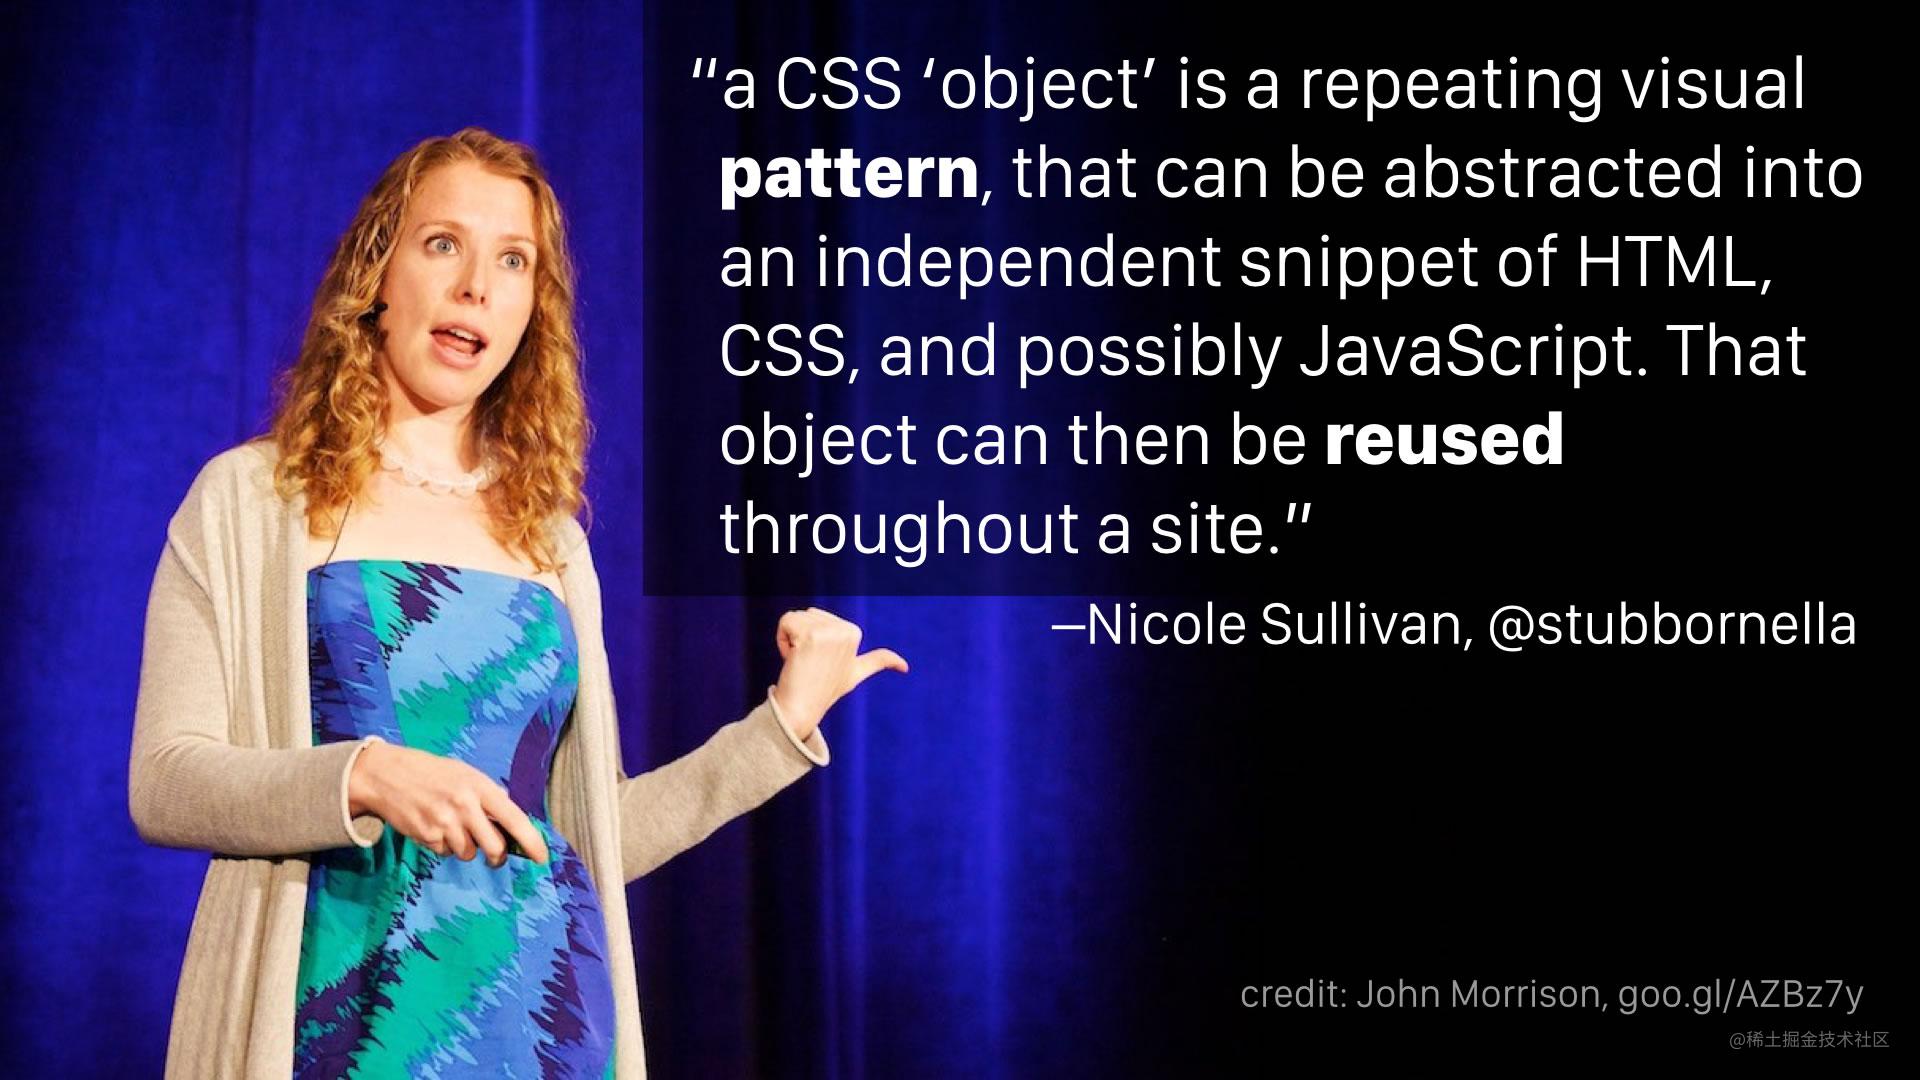 “a CSS ‘object’ is a repeating visual pattern, that can be abstracted into an independent snippet of HTML, CSS, and possibly JavaScript. That object can then be reused throughout a site.” —Nicole Sullivan